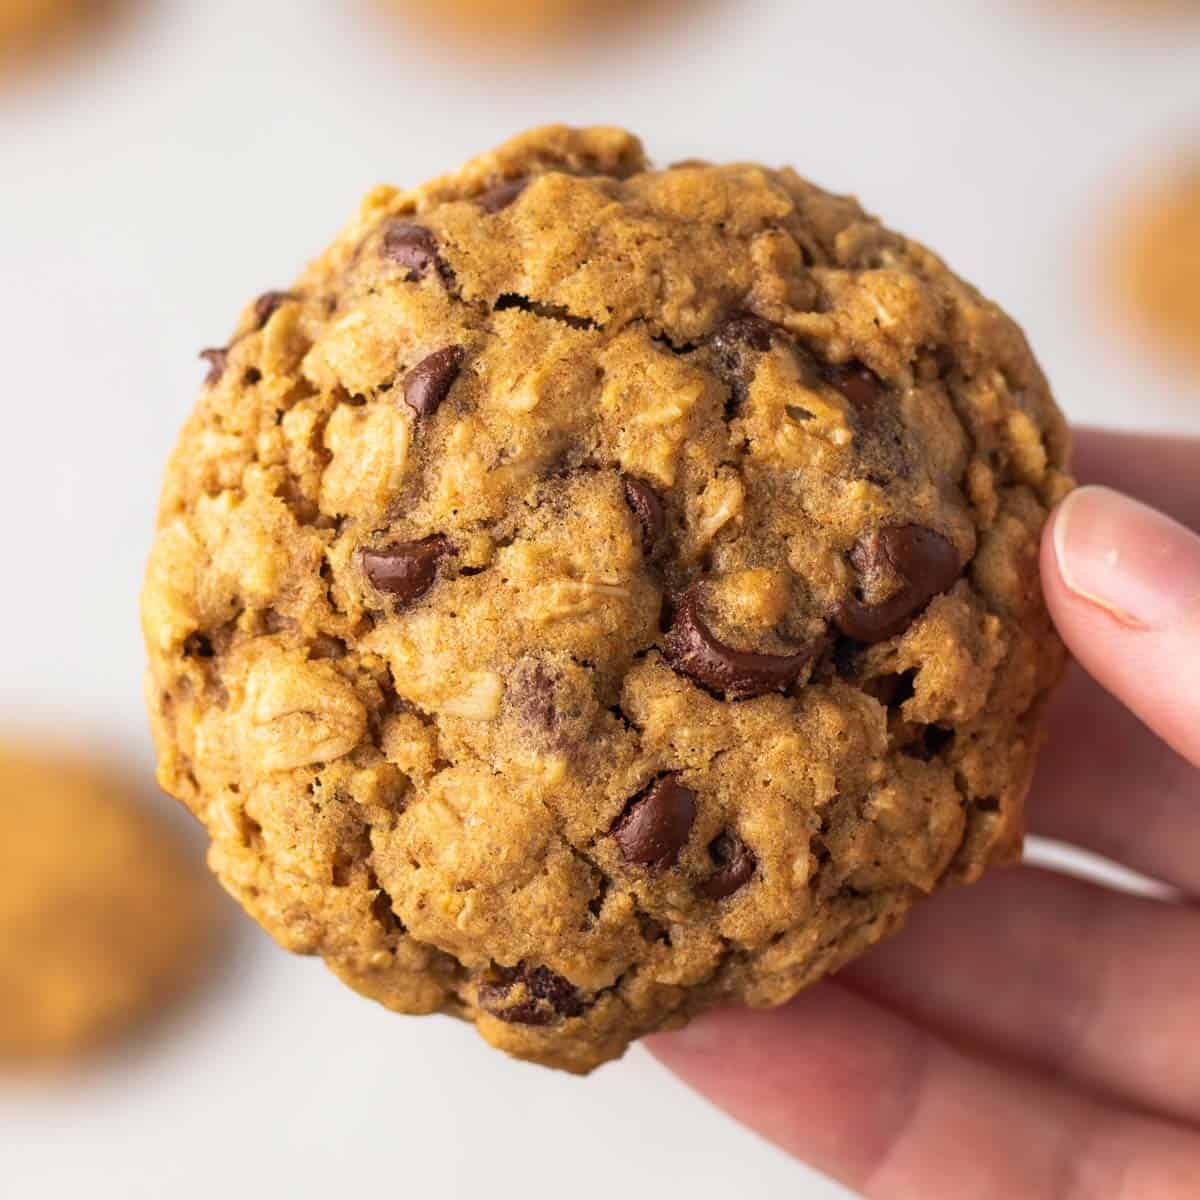 A close-up view of a person holding the best vegan oatmeal chocolate chip cookie.